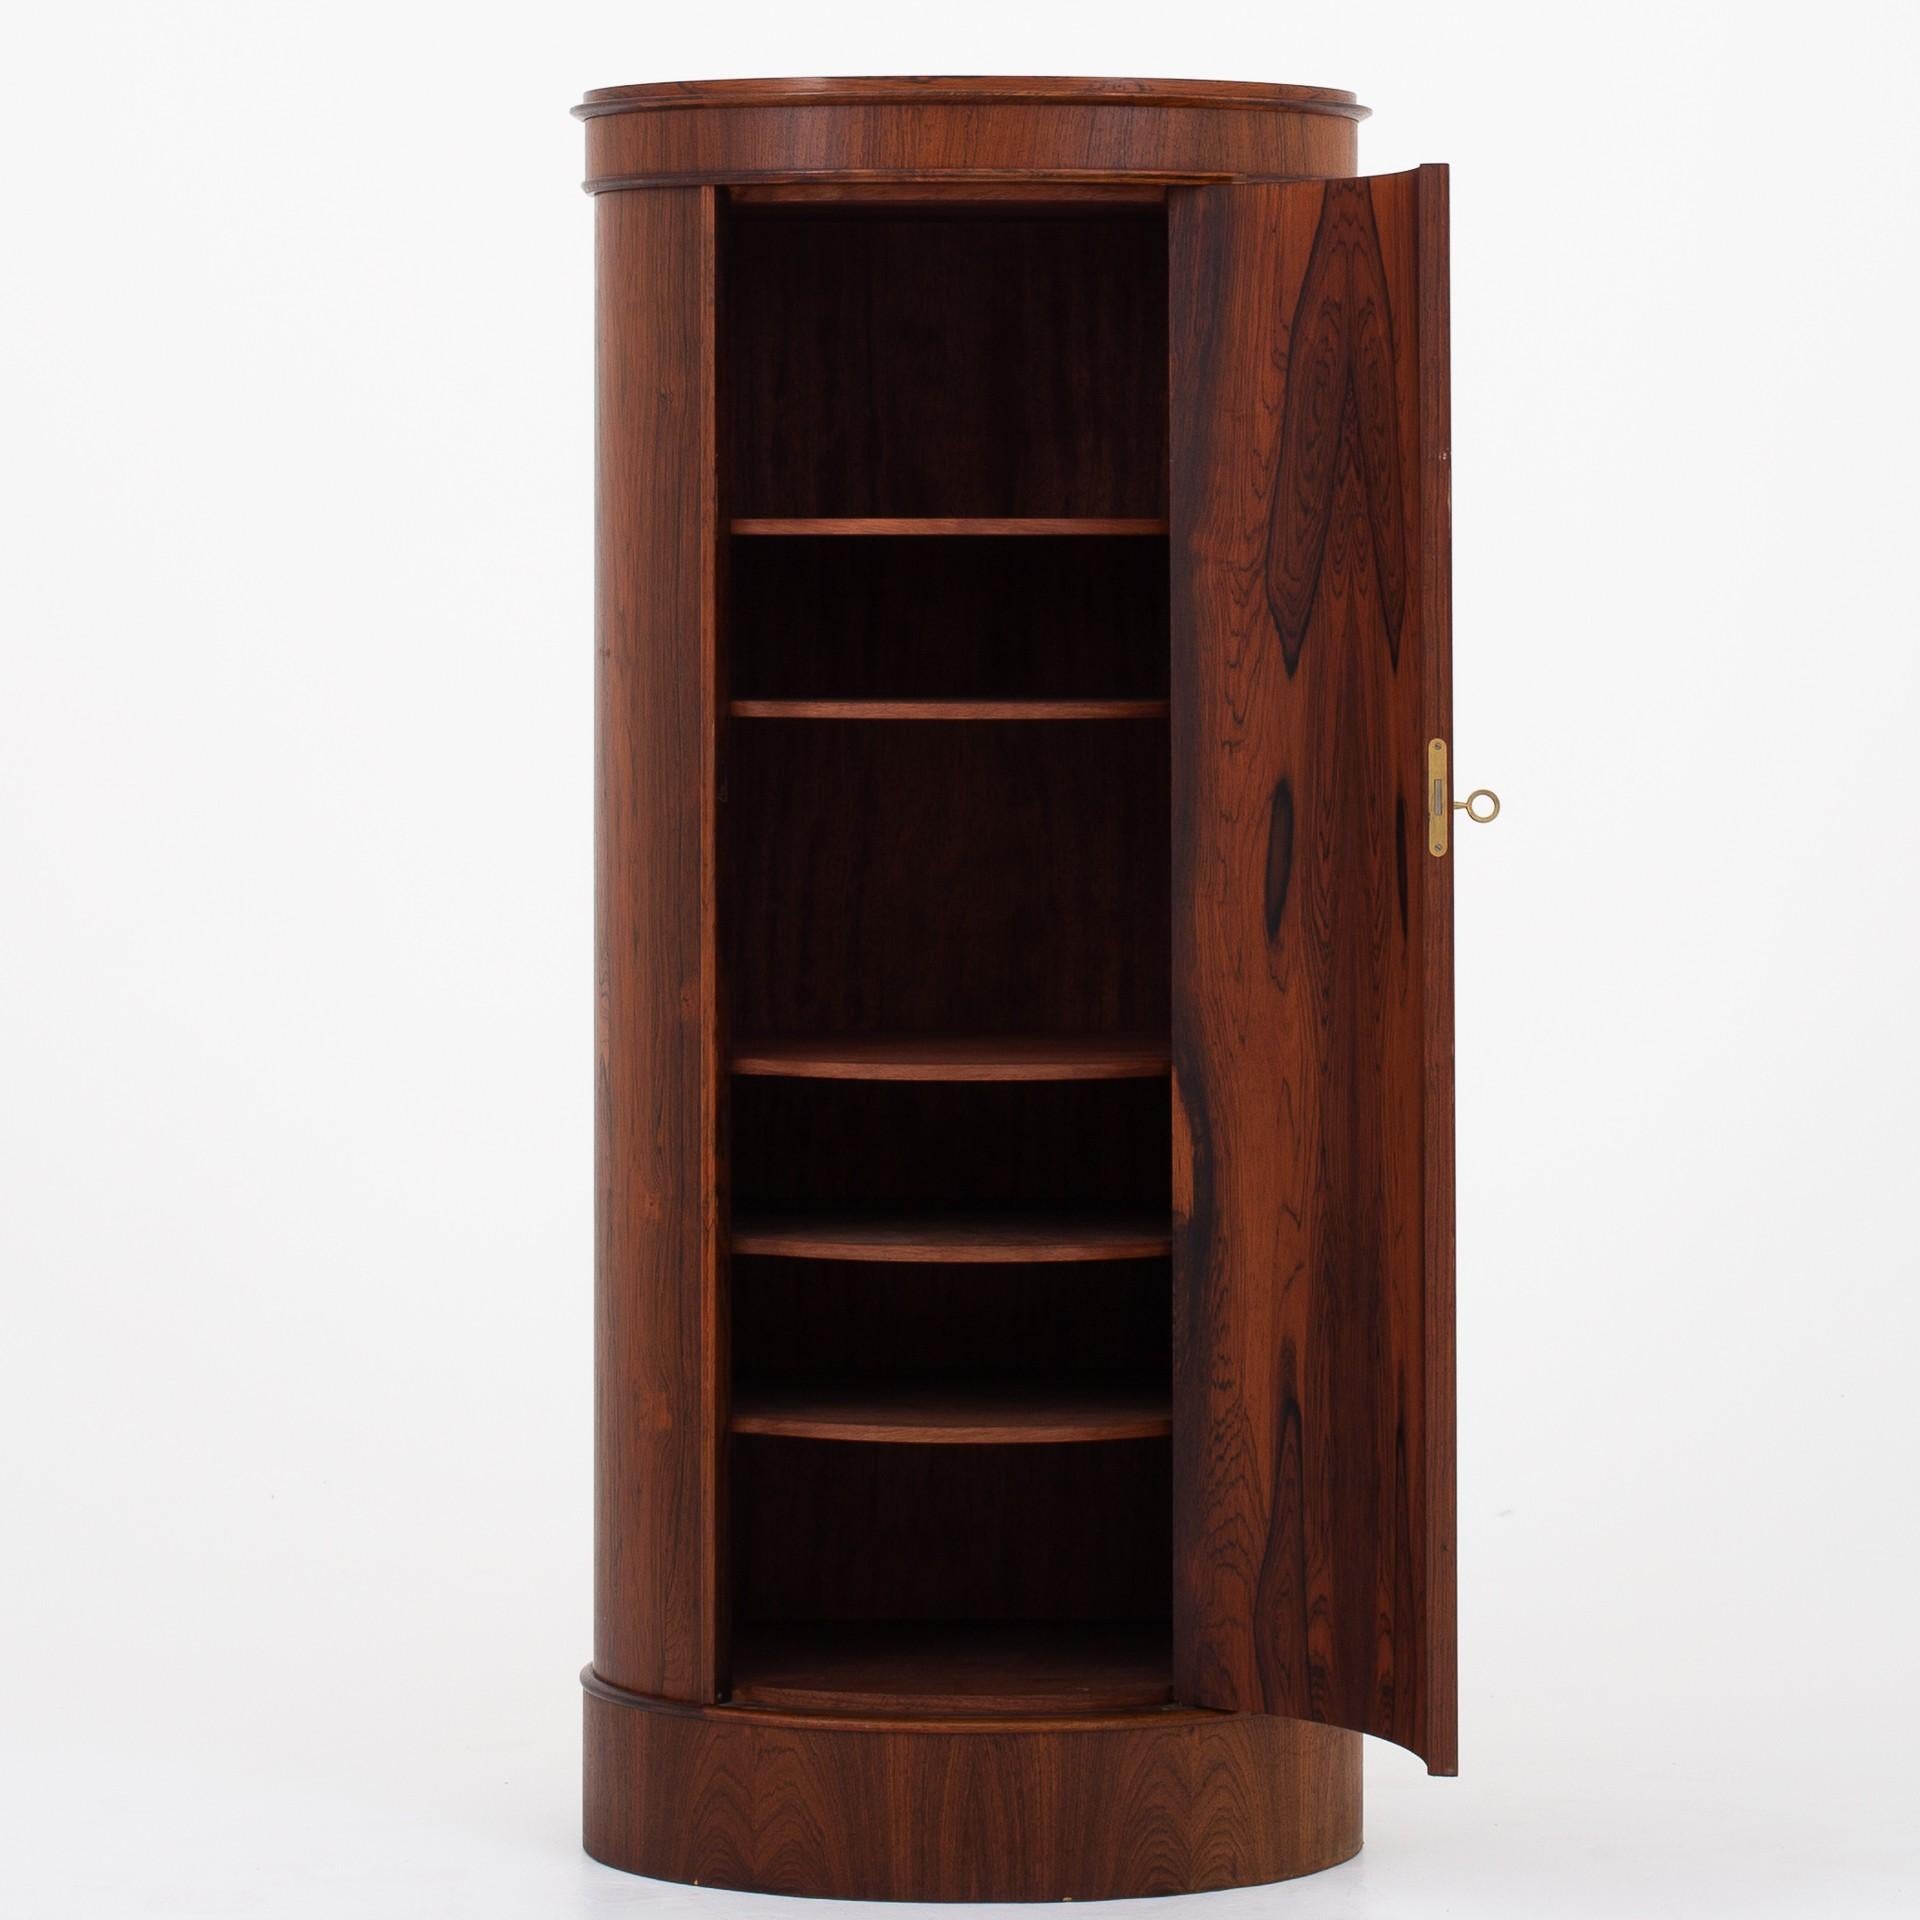 20th Century One Pedestal Cabinets by Johannes Sorth